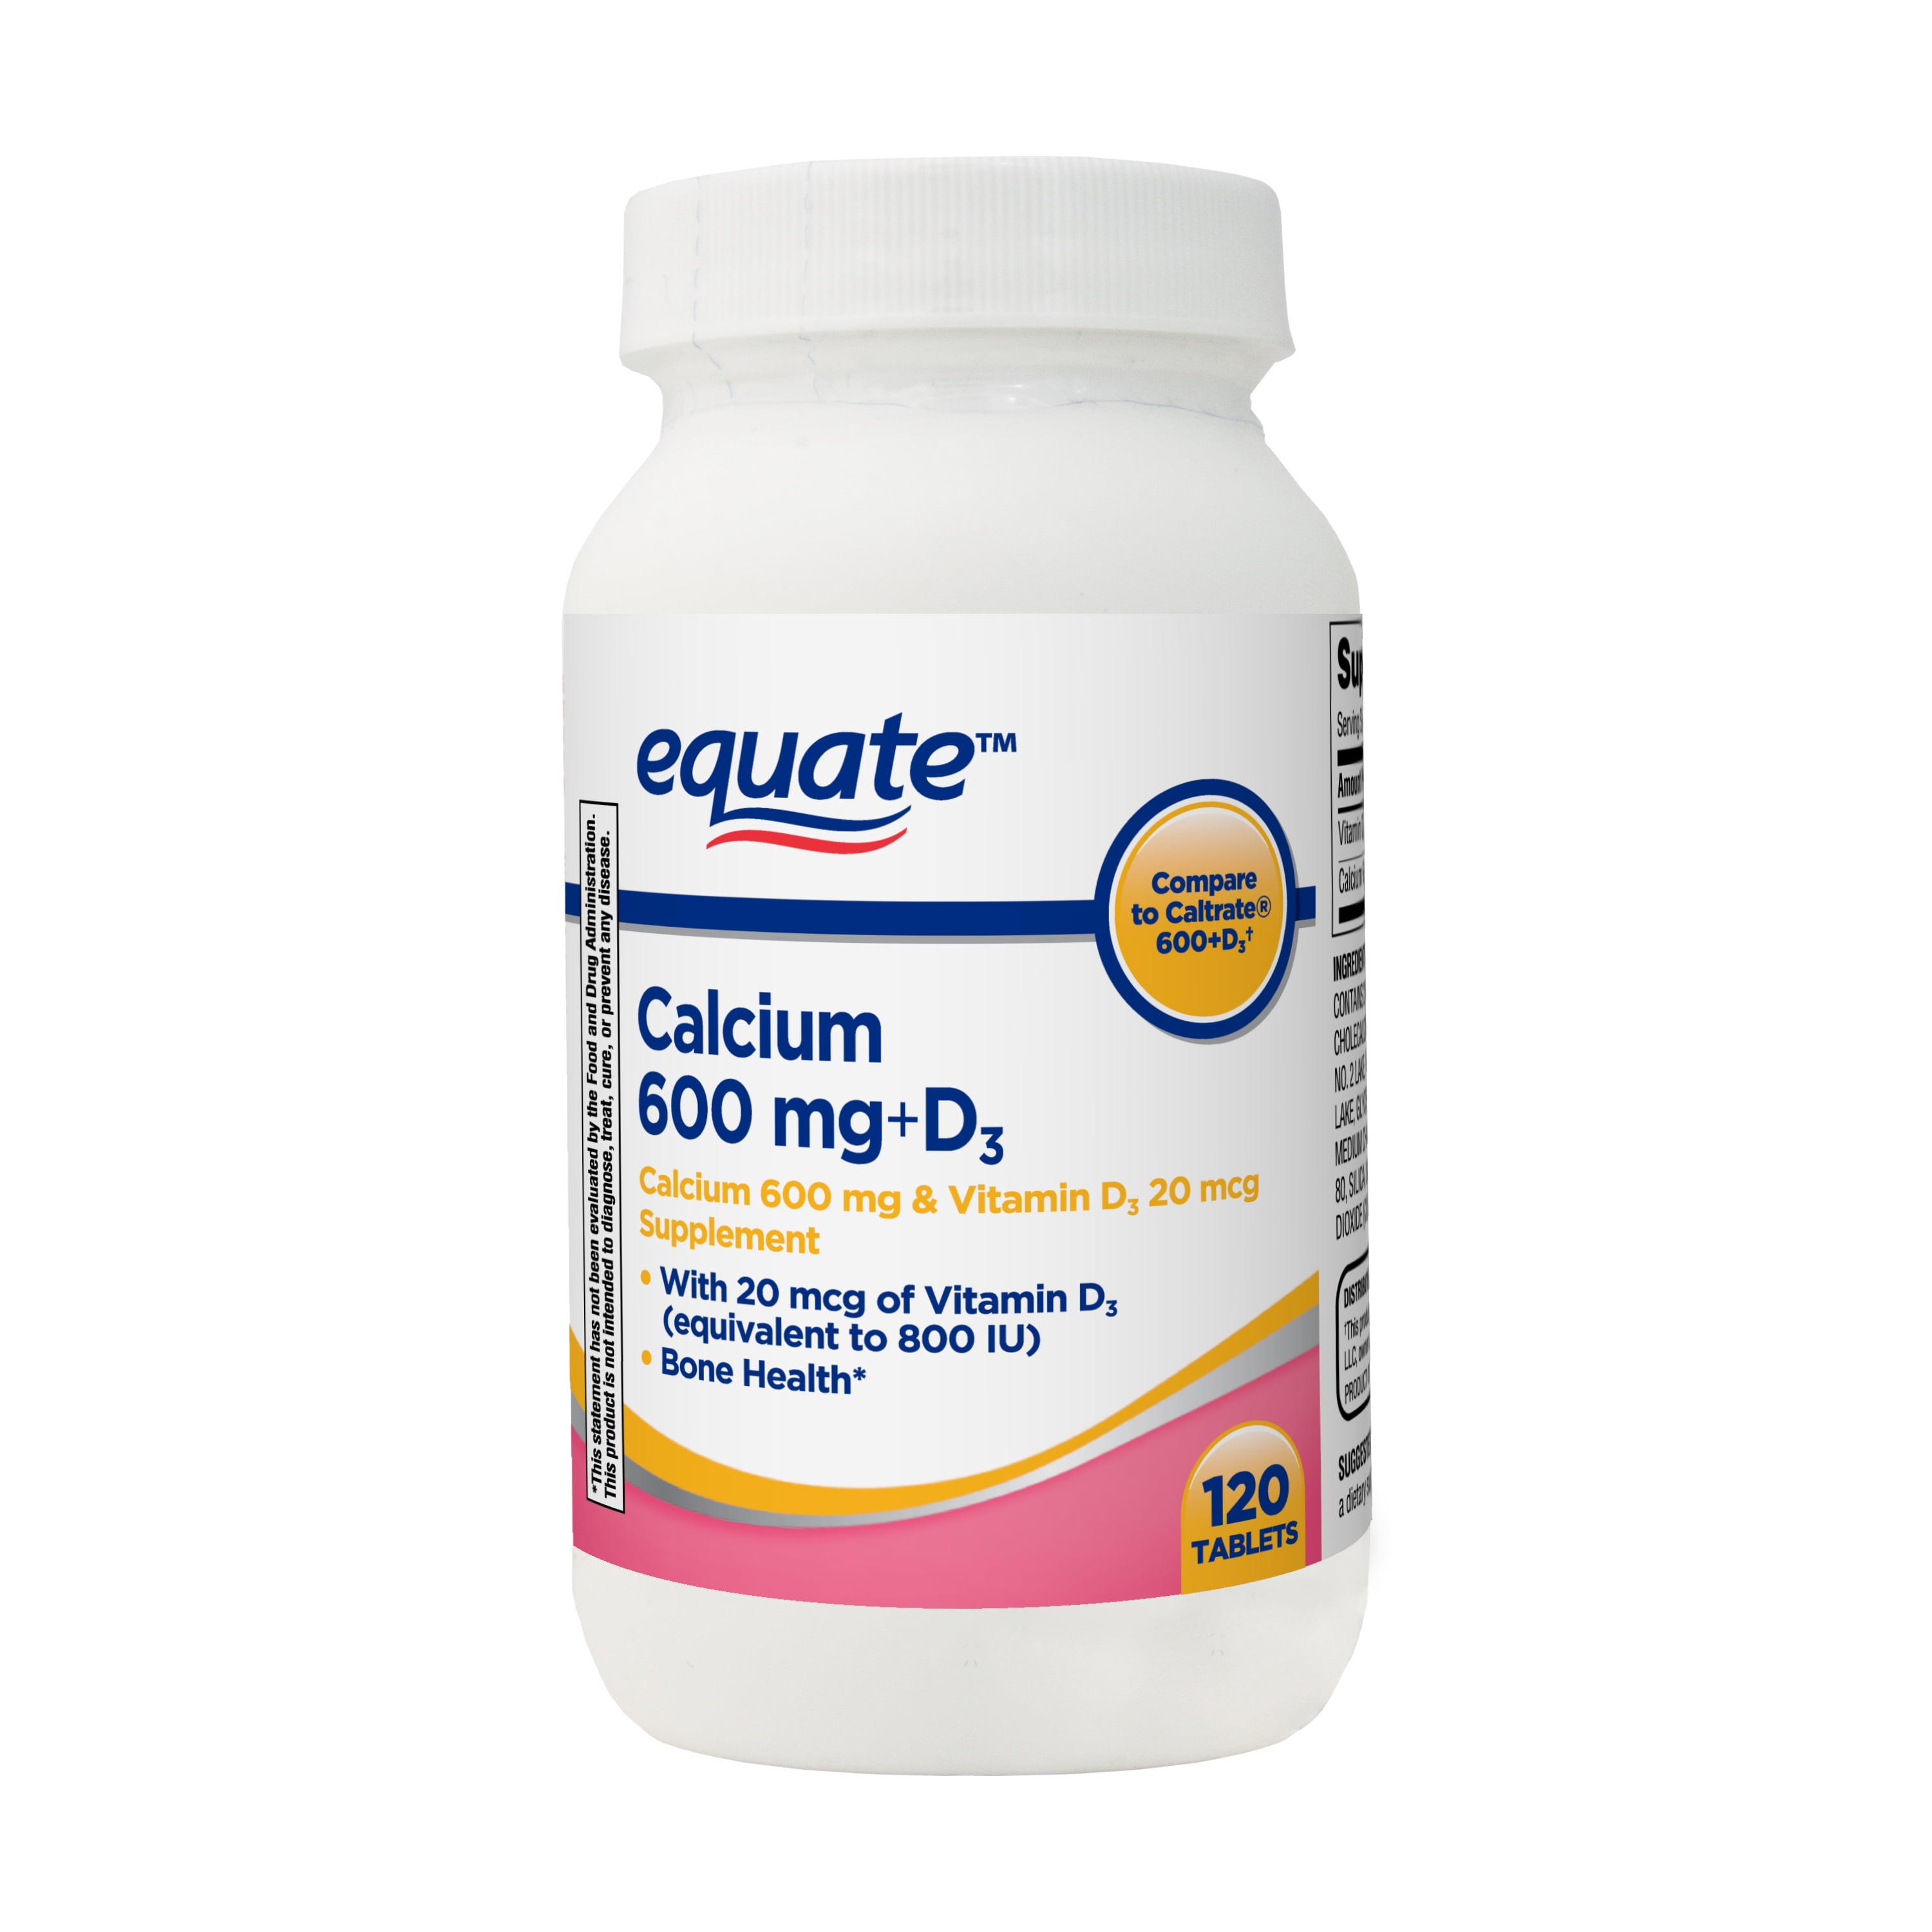 Equate Calcium + D3 Tablets Dietary Supplement, 600 mg, 120 Count